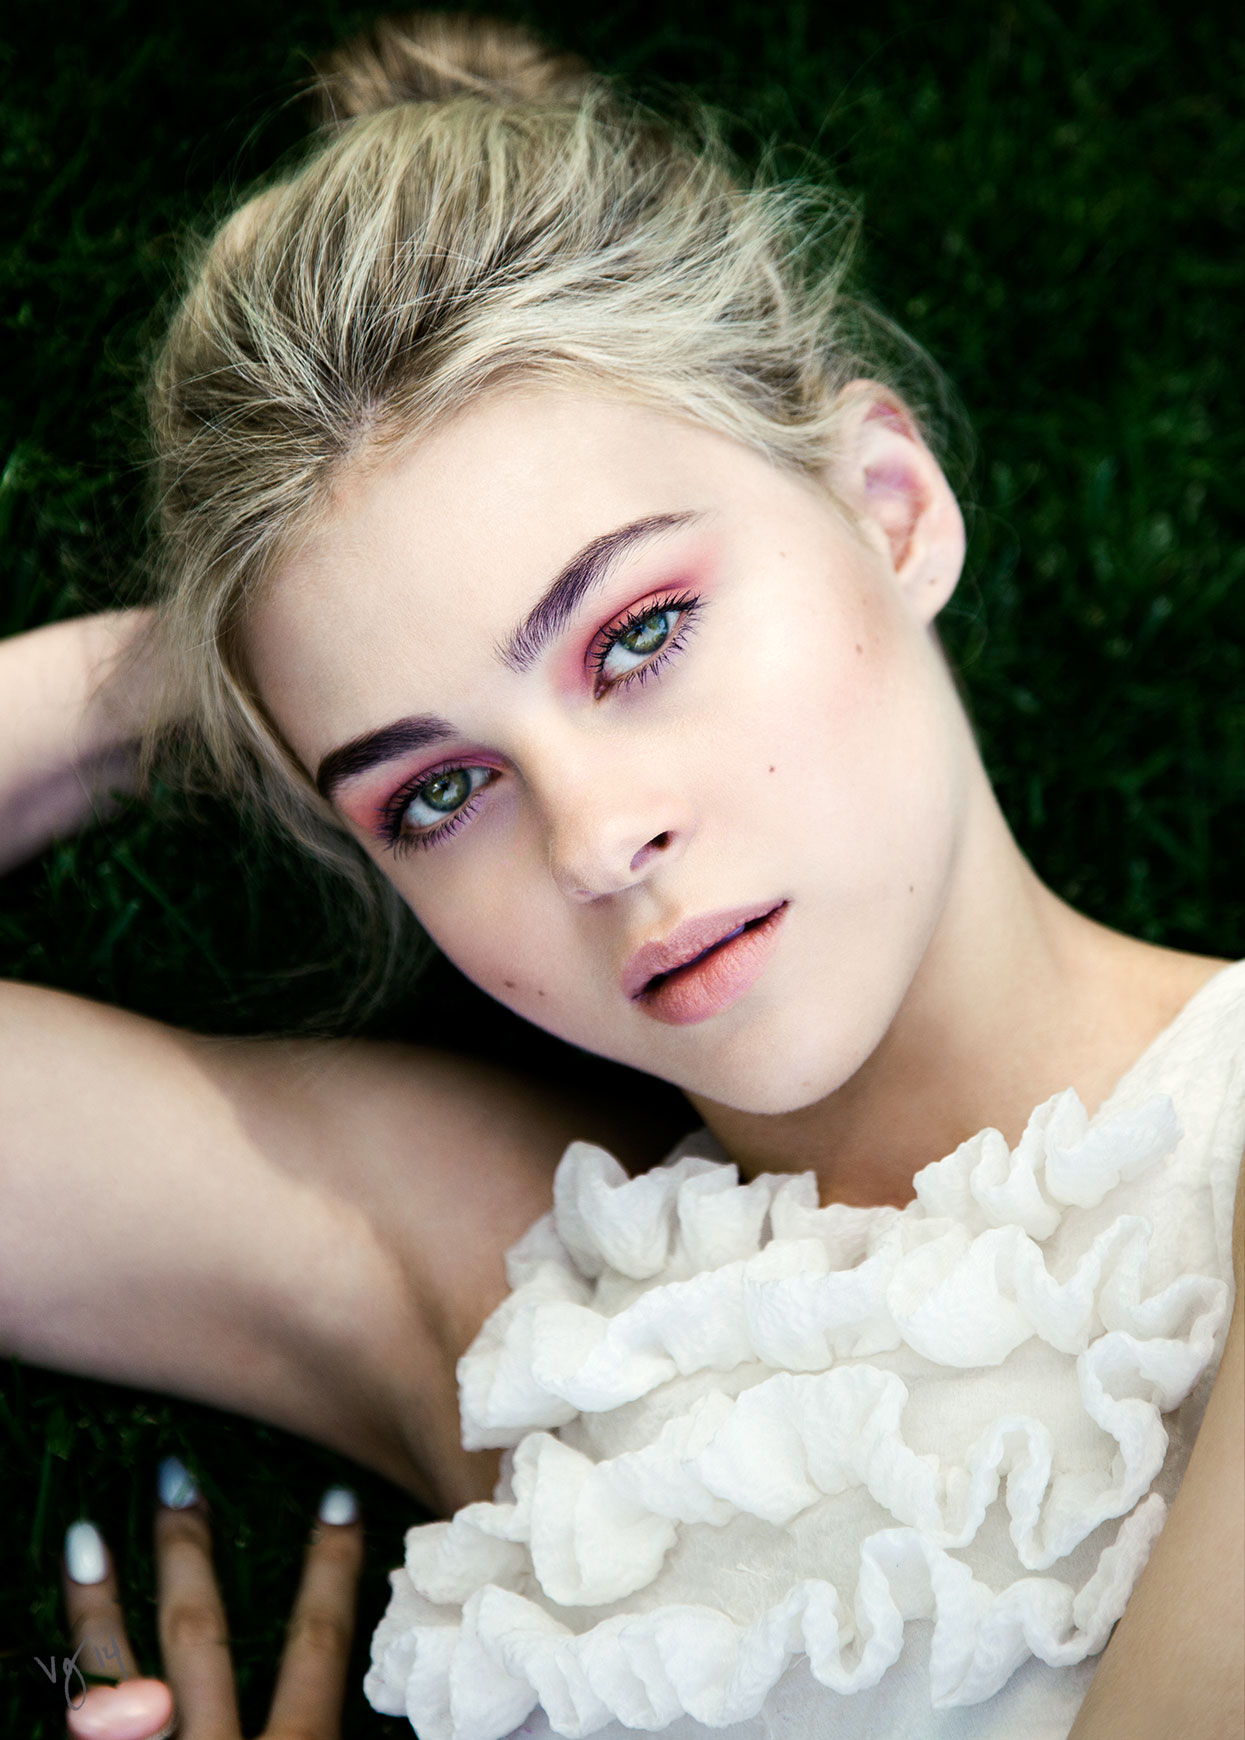 VIOLET IN BLOOM featuring Nicola Peltz  |  The new Transformers star has a tete-a-tete with Rosie Huntington-Whiteley  |   #VioletGrey, The Industry’s Beauty Edit